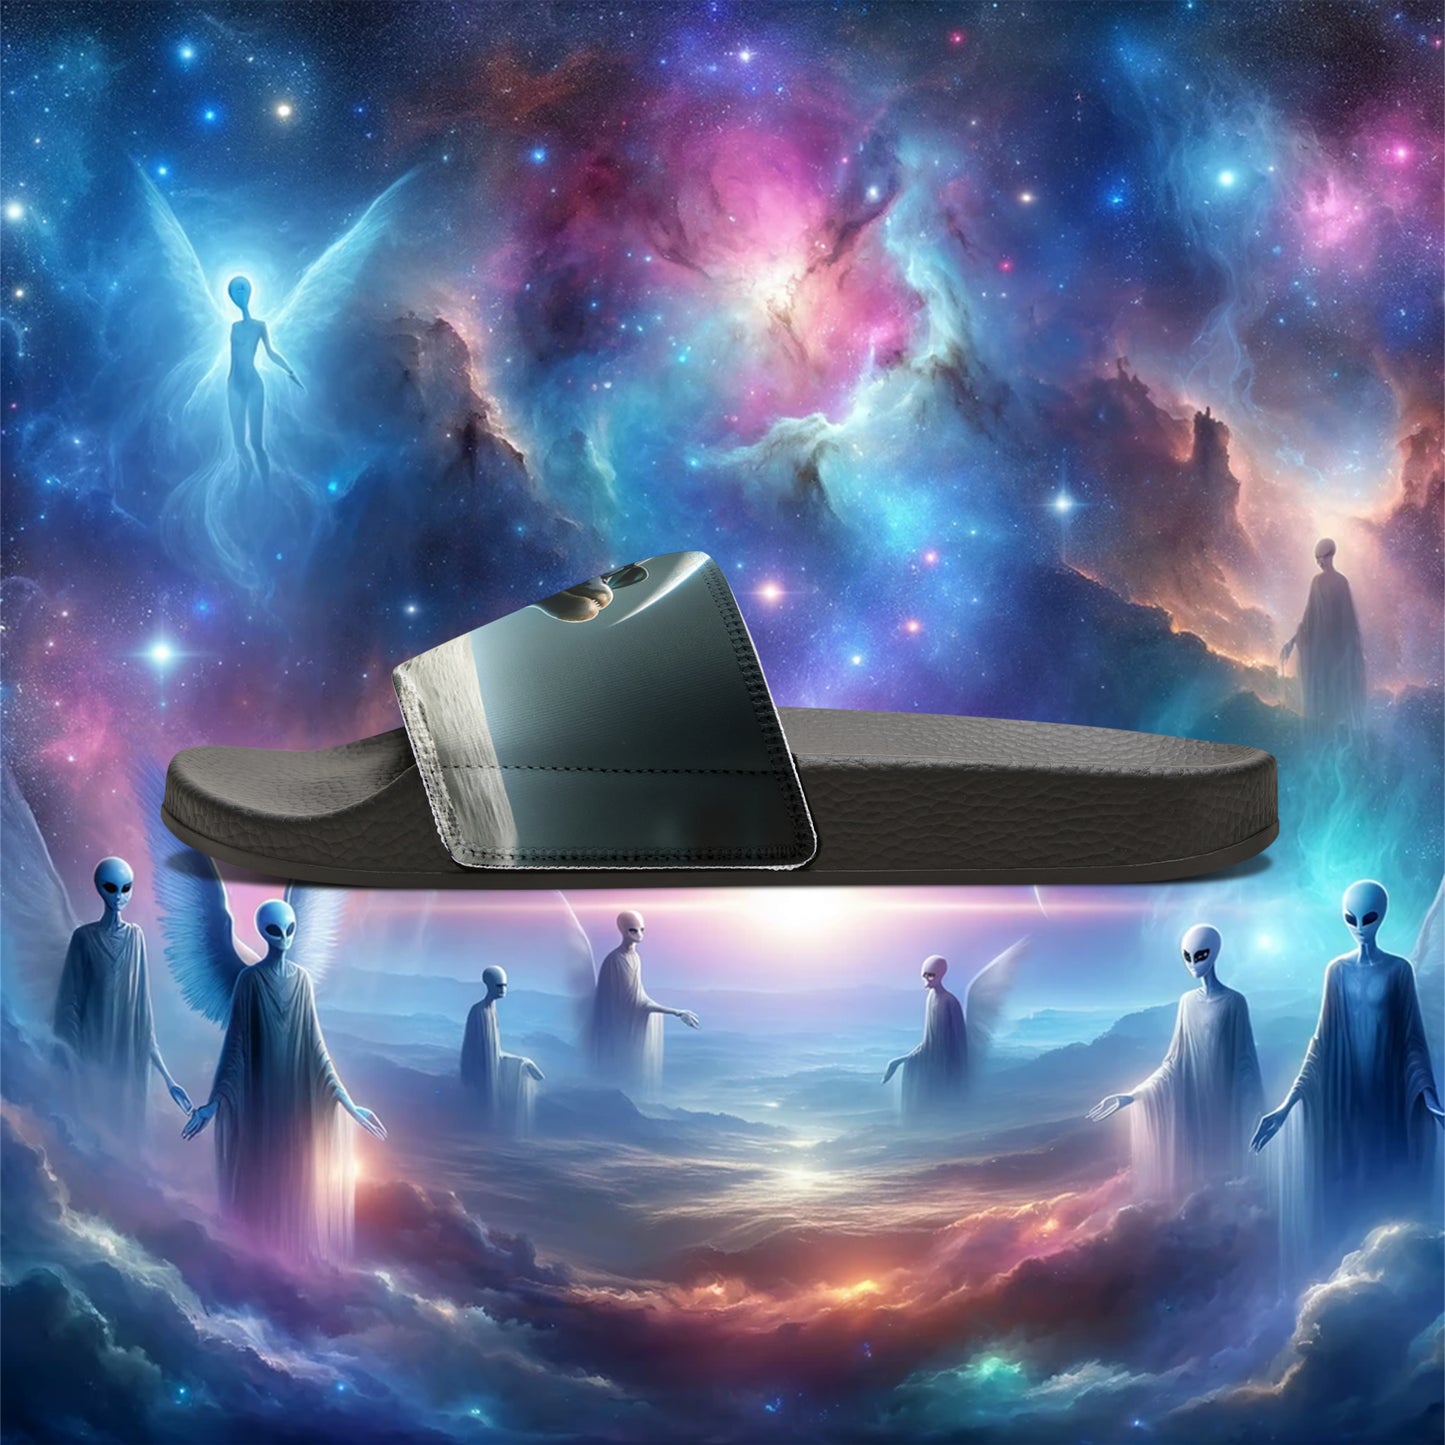 Galactic Guardian: Serenity Amidst the Star Storm - Men's PU Slide Sandals